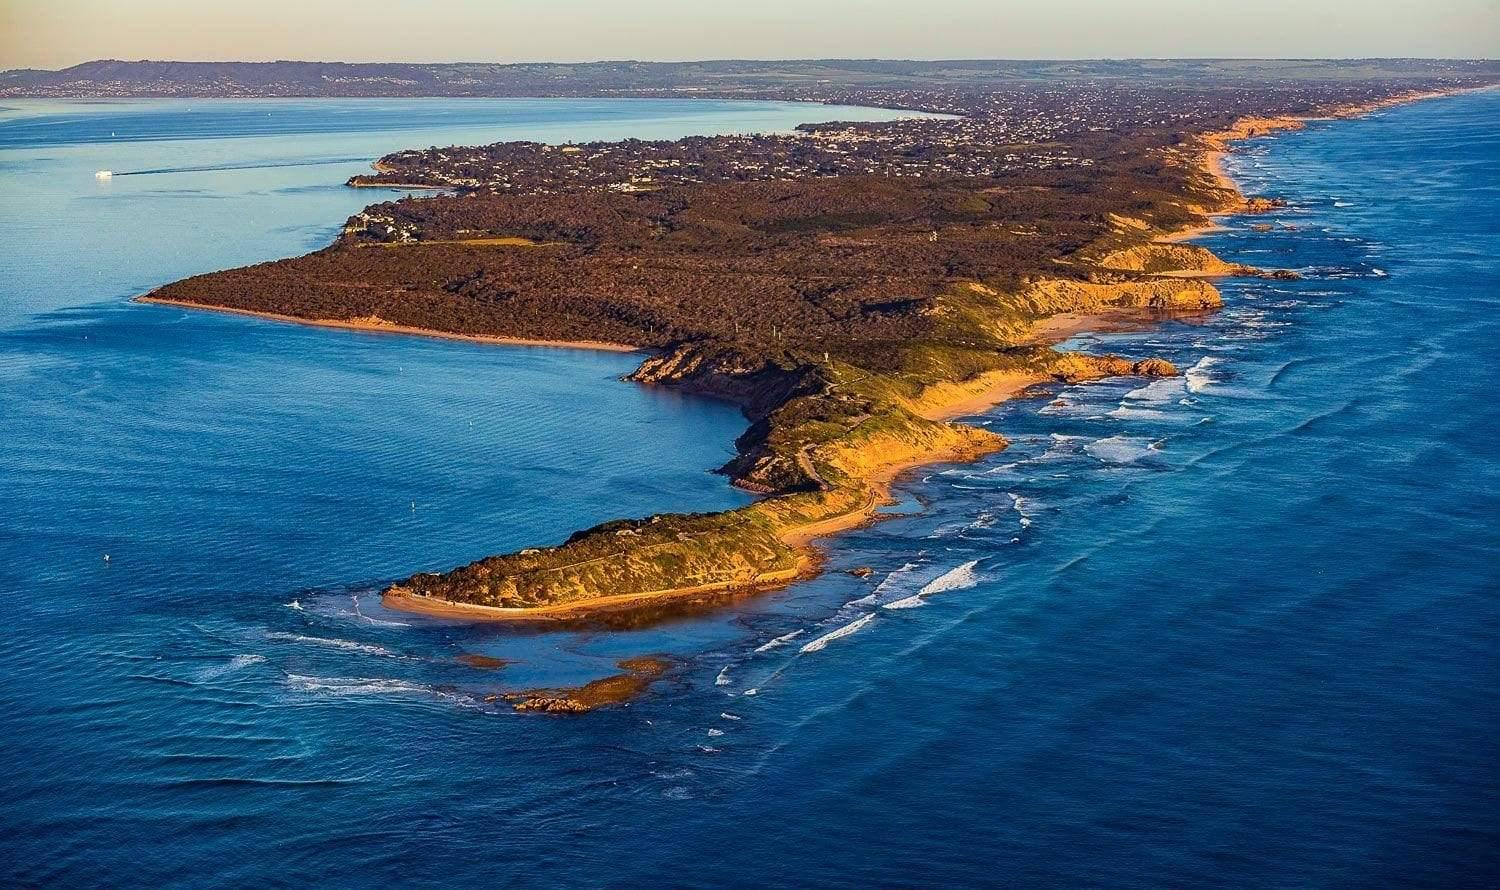 A wide greenery island mound, Point Nepean from above - Mornington Peninsula VIC